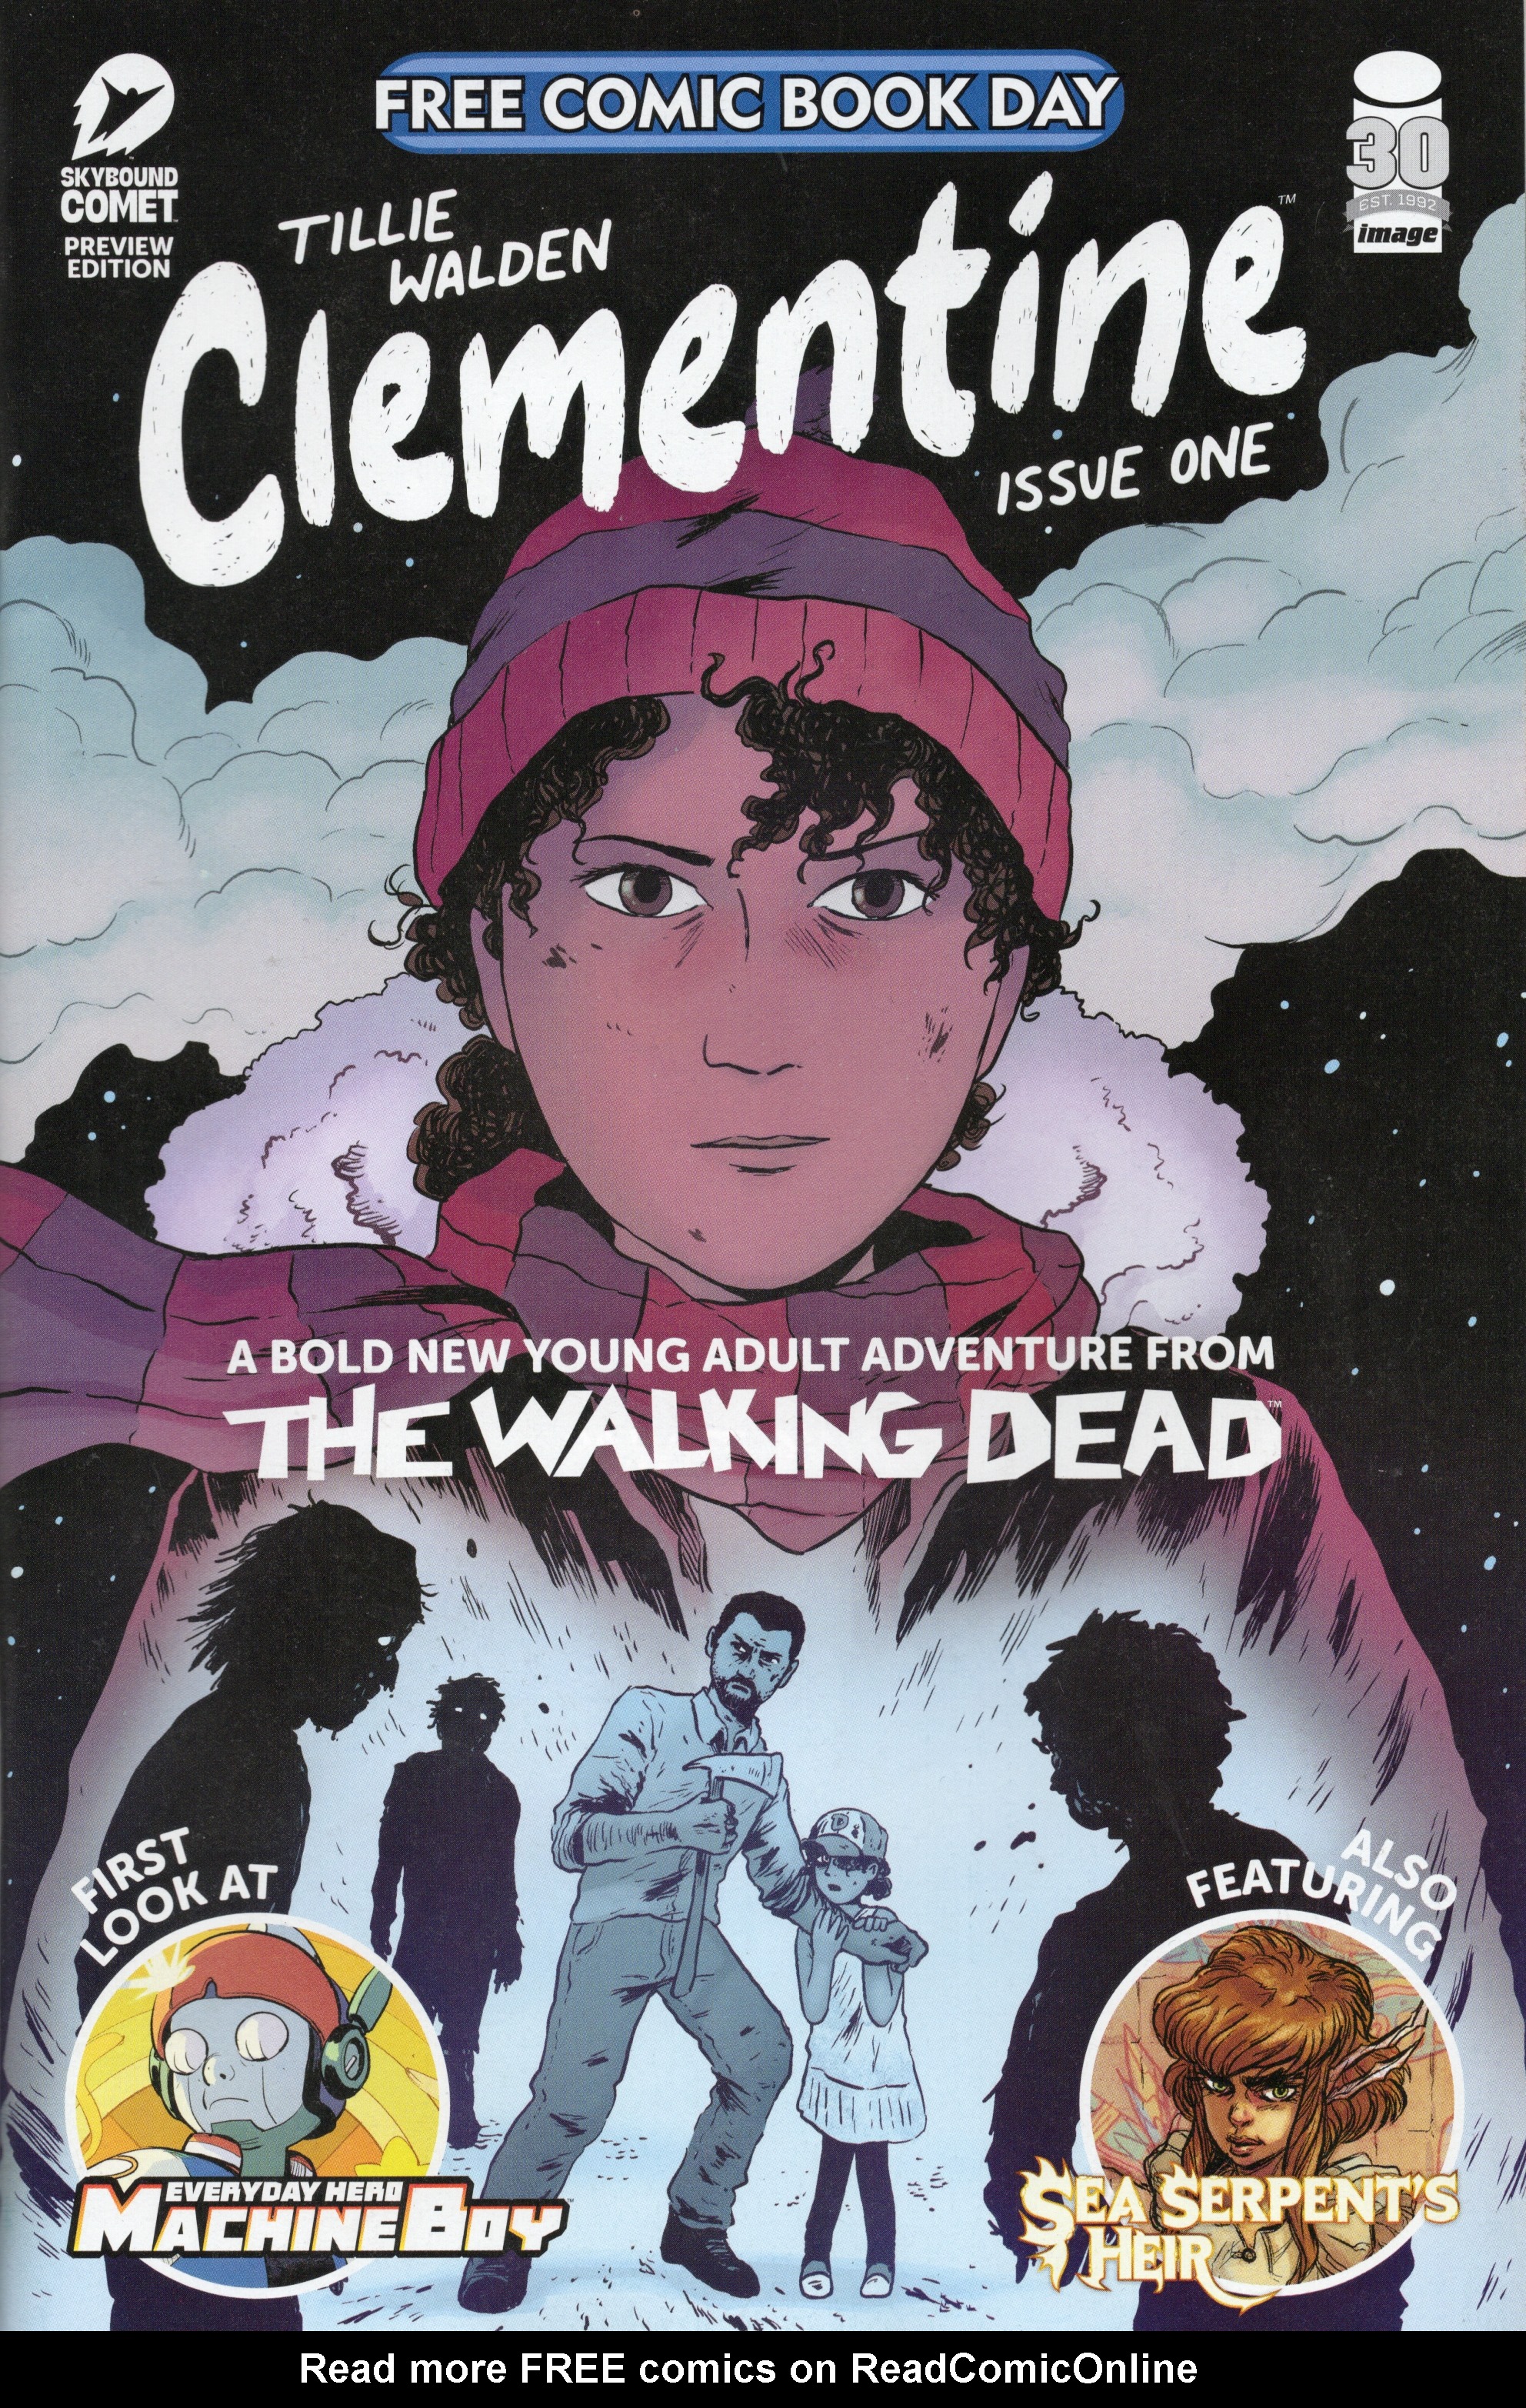 Read online Free Comic Book Day 2022 comic -  Issue # Image The Walking Dead Clementine, Everyday Hero MachineBoy and Sea Serpent's Heir - 1